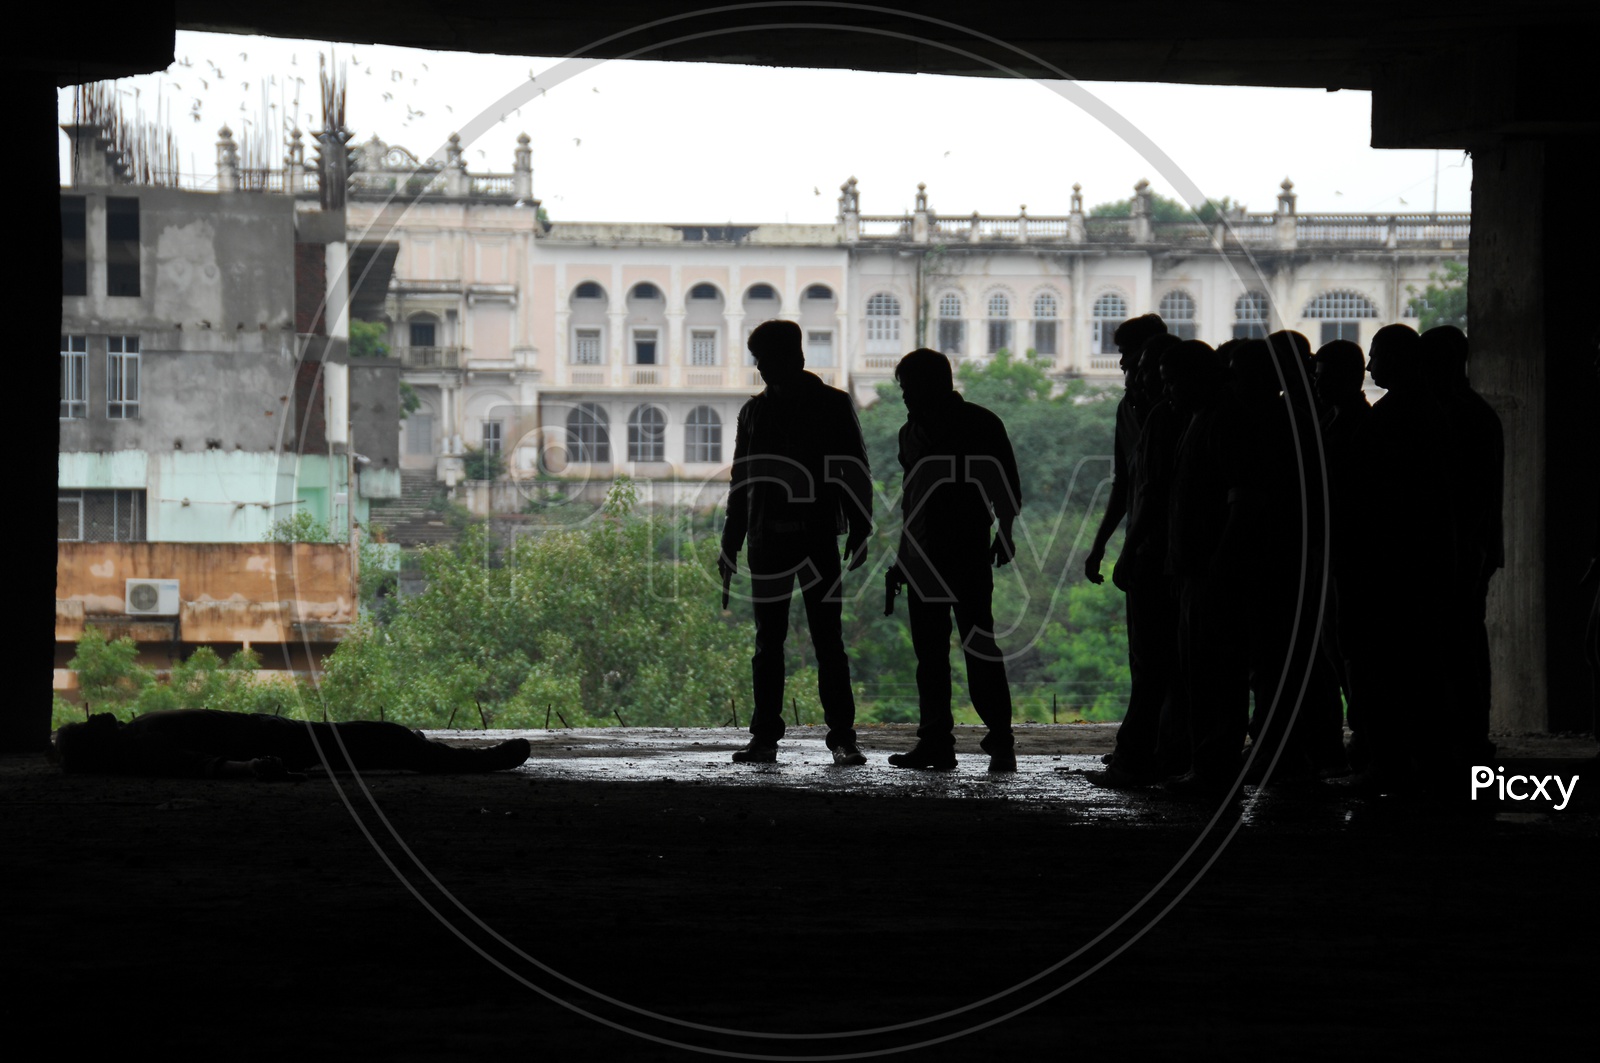 Silhouette Of Group Of People in an Under Construction Building in Movie Working Stills